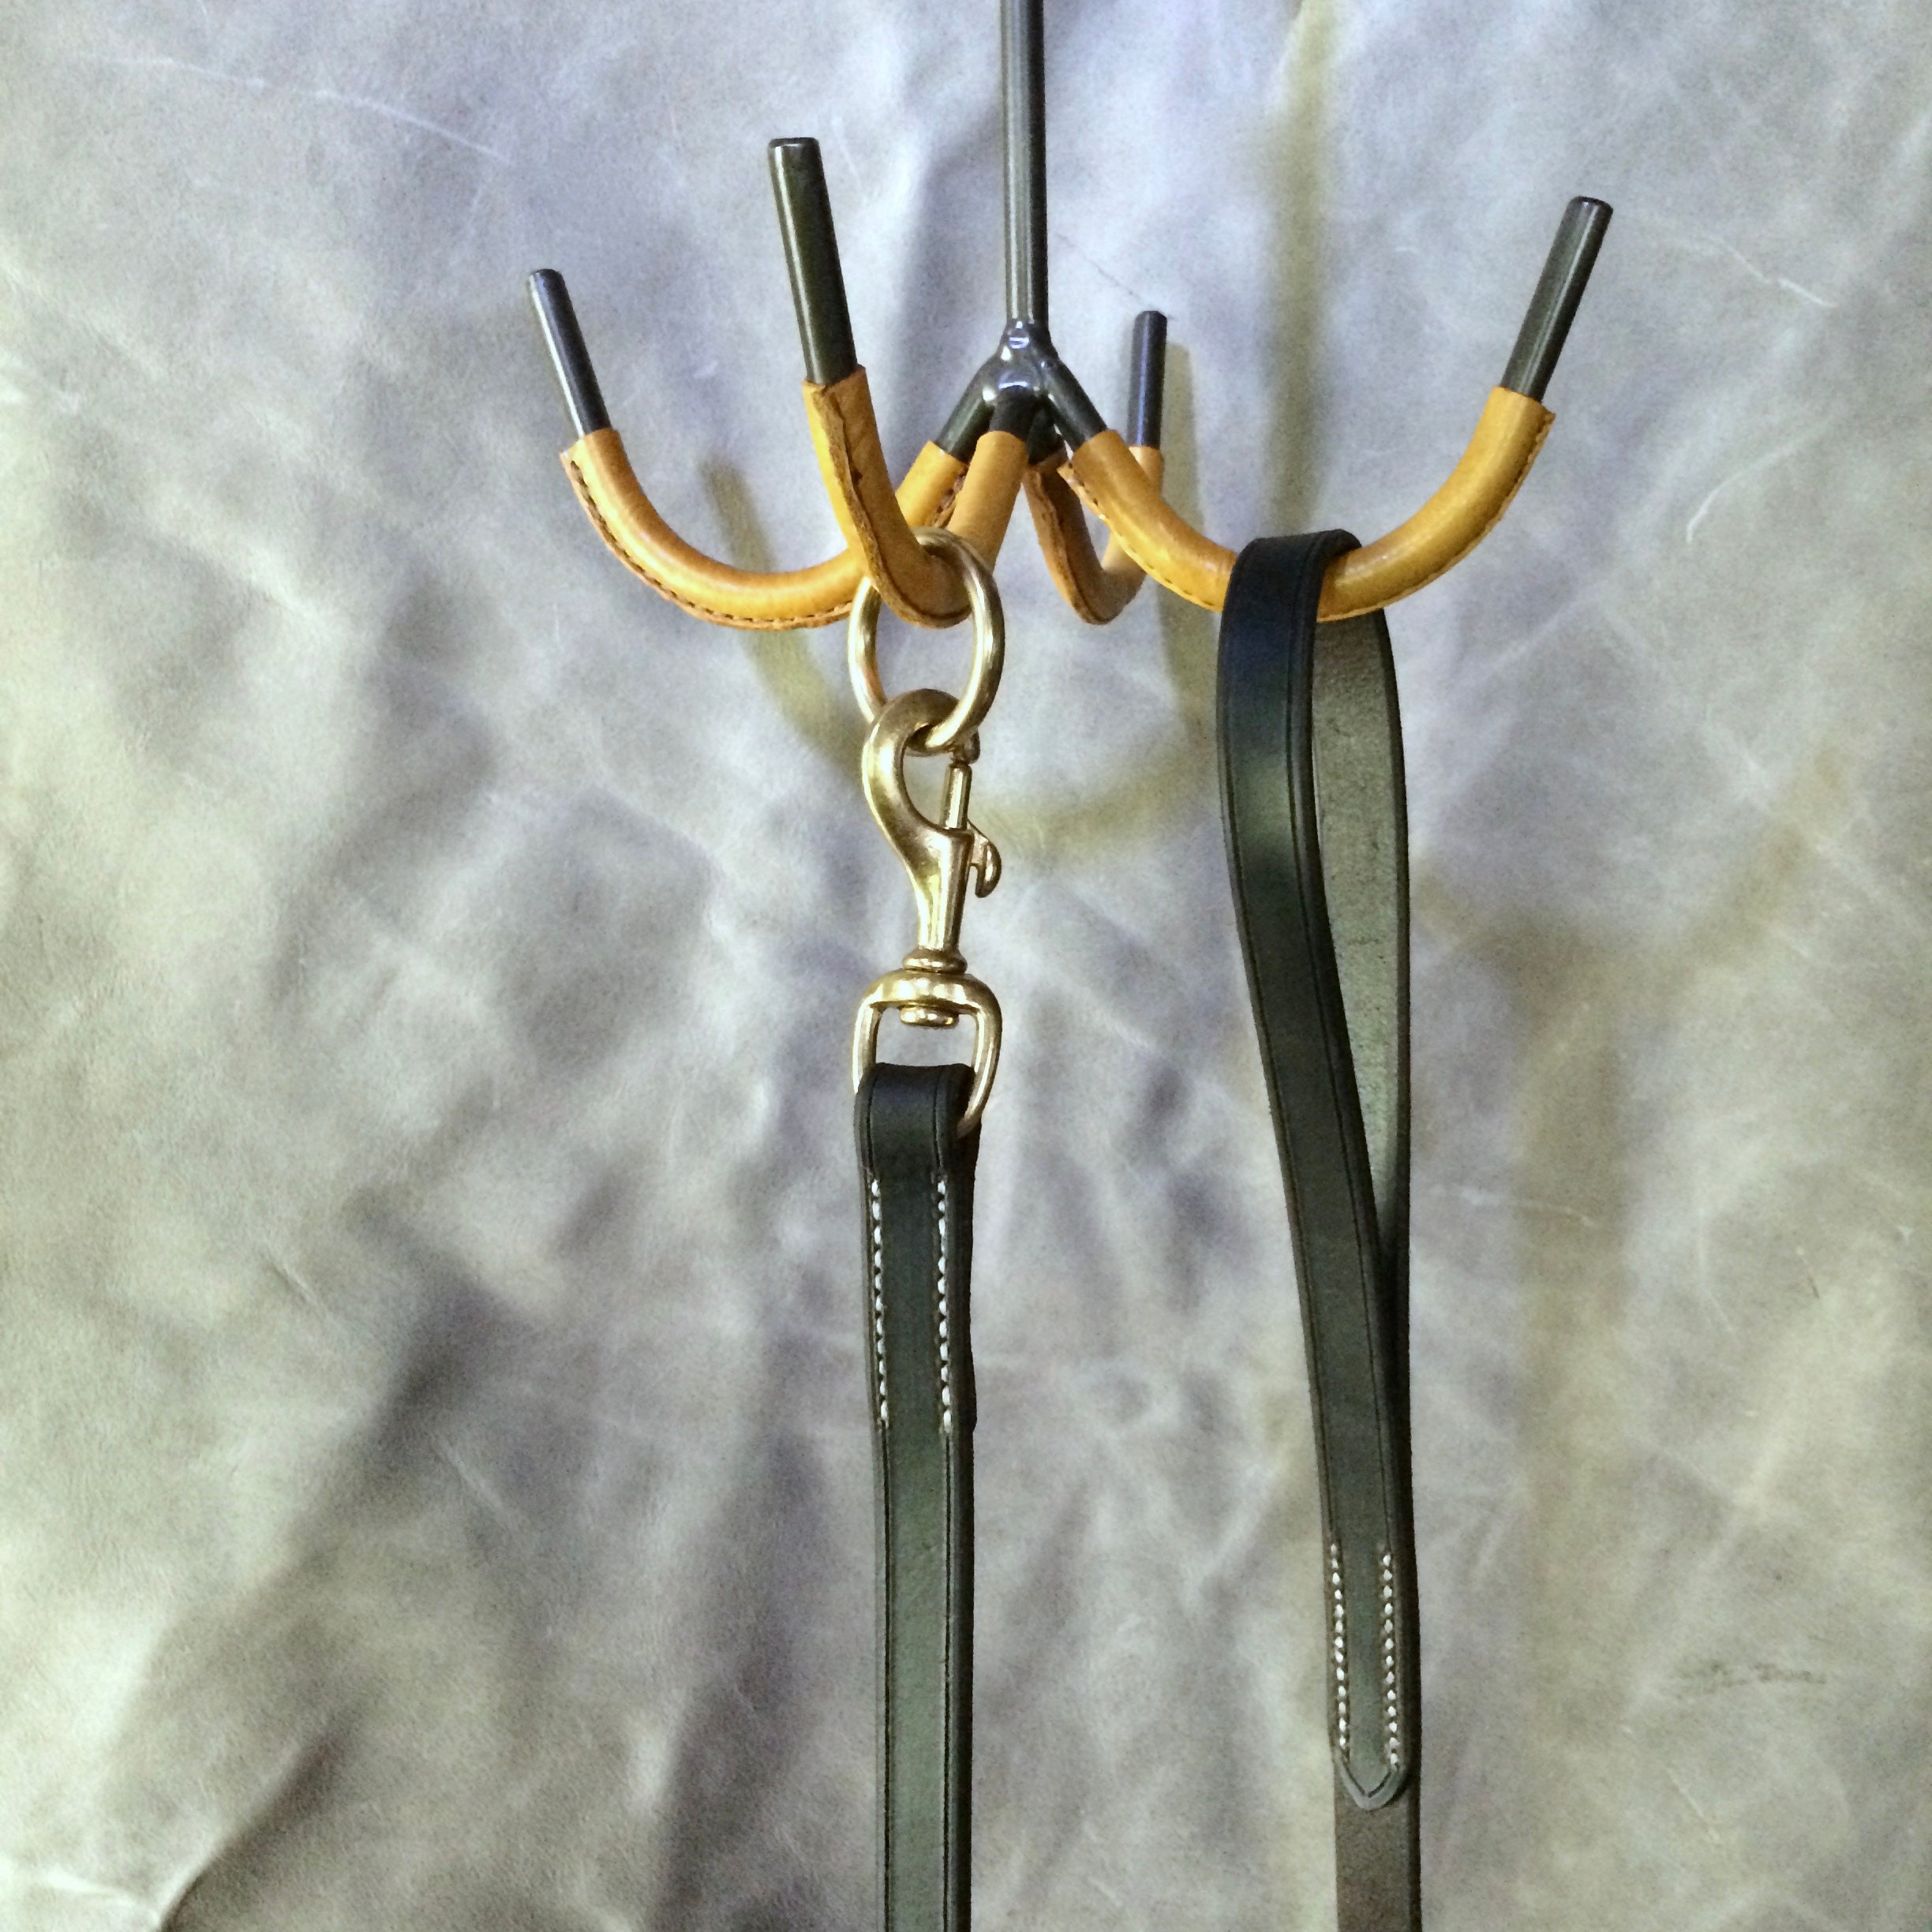 Horse Tack Hook: Hand made leather accessories; home goods; Hanger for dog  leashes, keys, bags, jackets, and horse tack